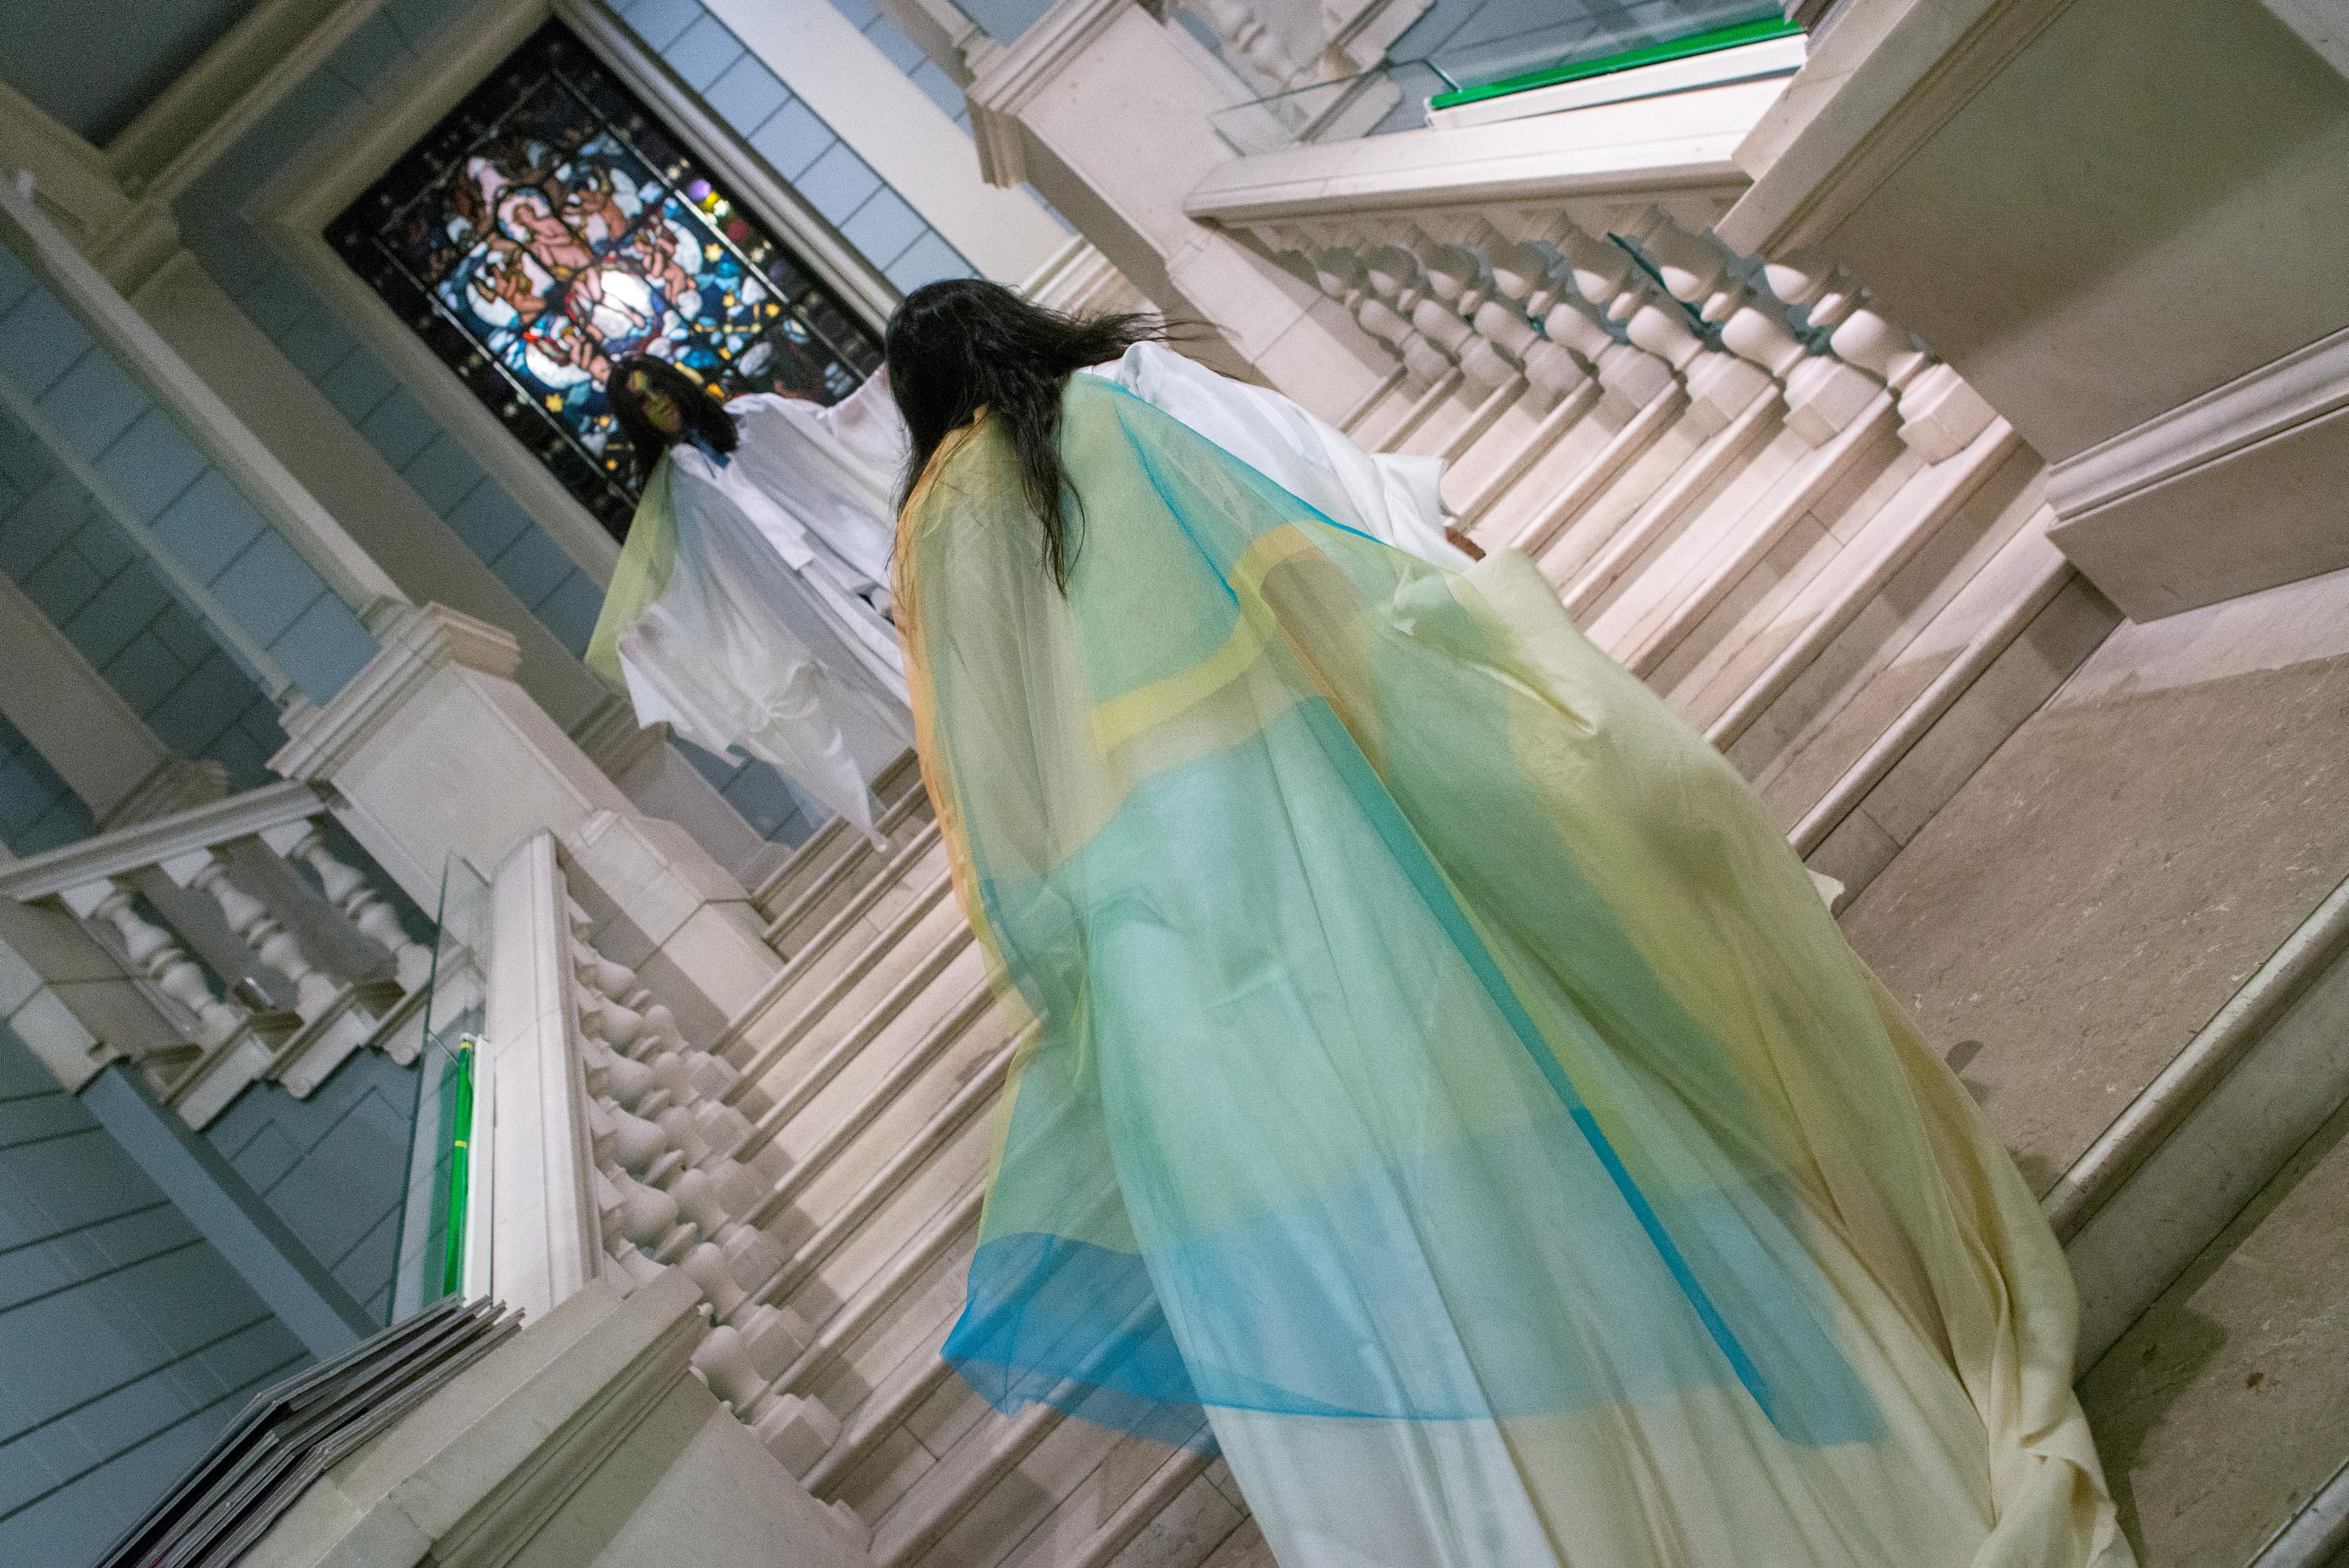 From a performance at Permanenten, with a person running up the stairs, with a colorful textile flowing behind them.